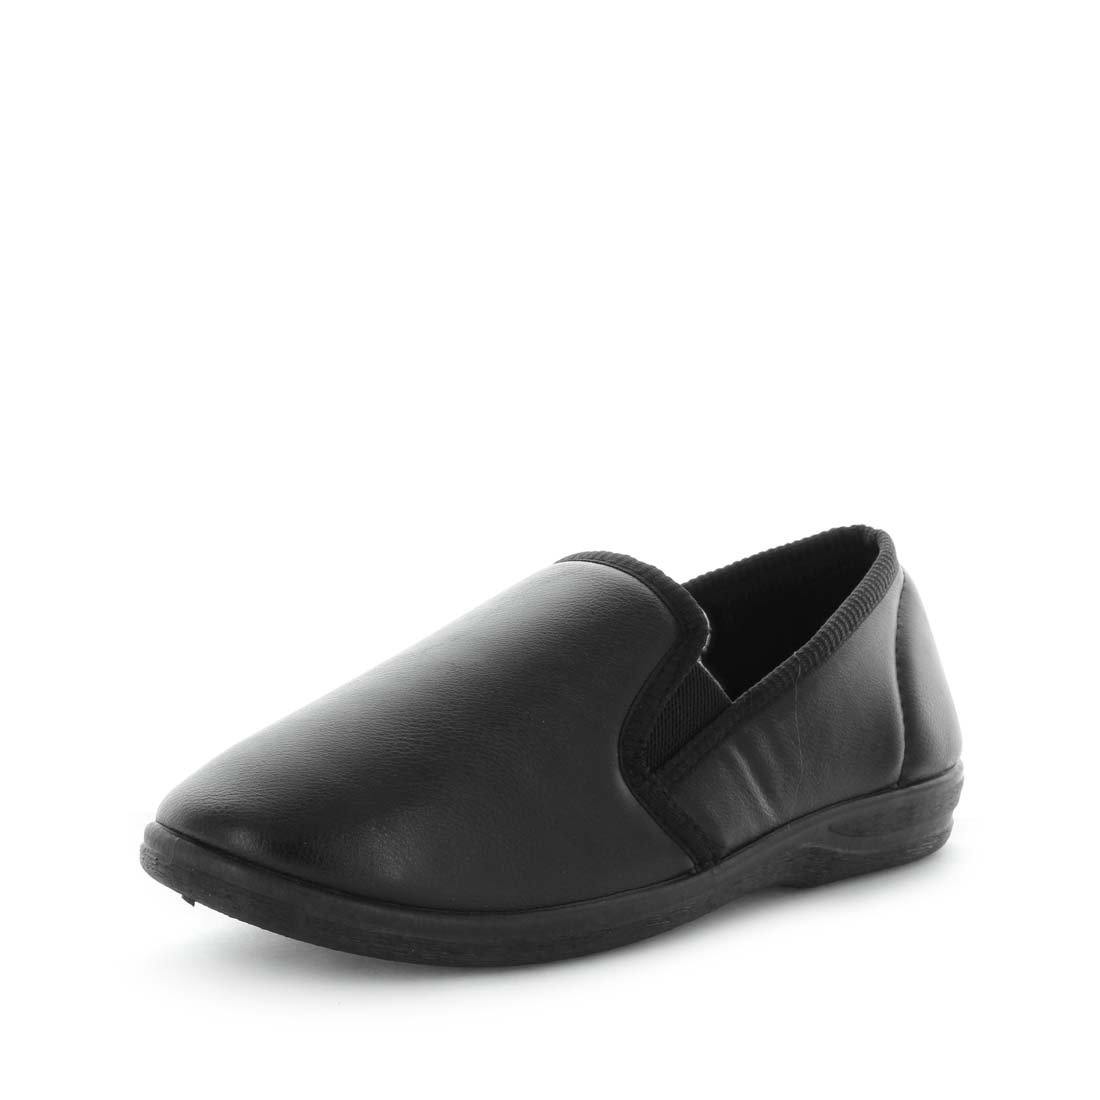 Classic mens slip on slipper, Edword by panda slippers. A black mens slipper made with soft materials and comfy fit design for the perfect indoor slipper.